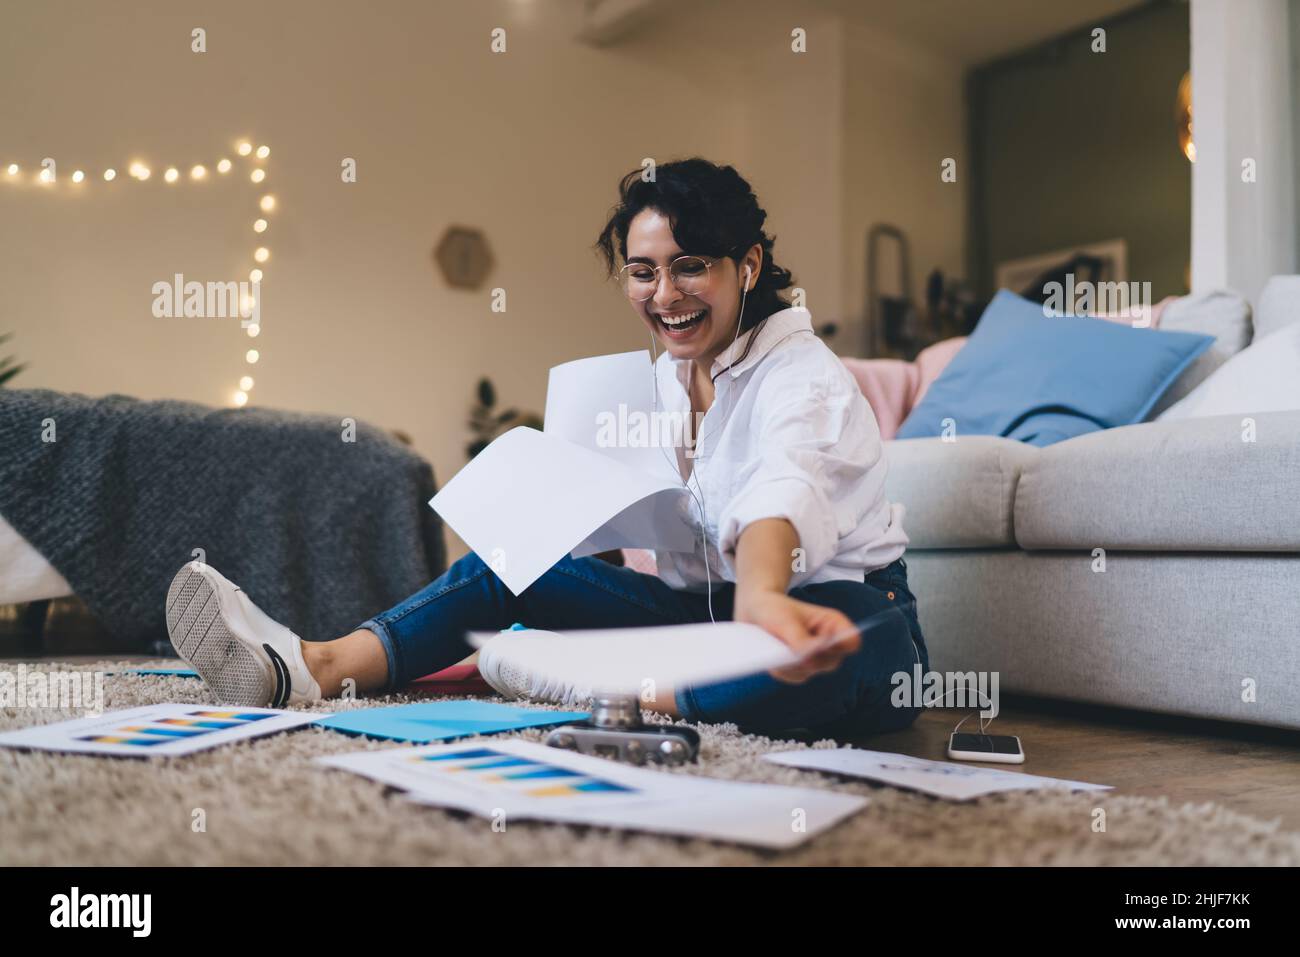 Laughing woman sitting on floor and doing paperwork Stock Photo